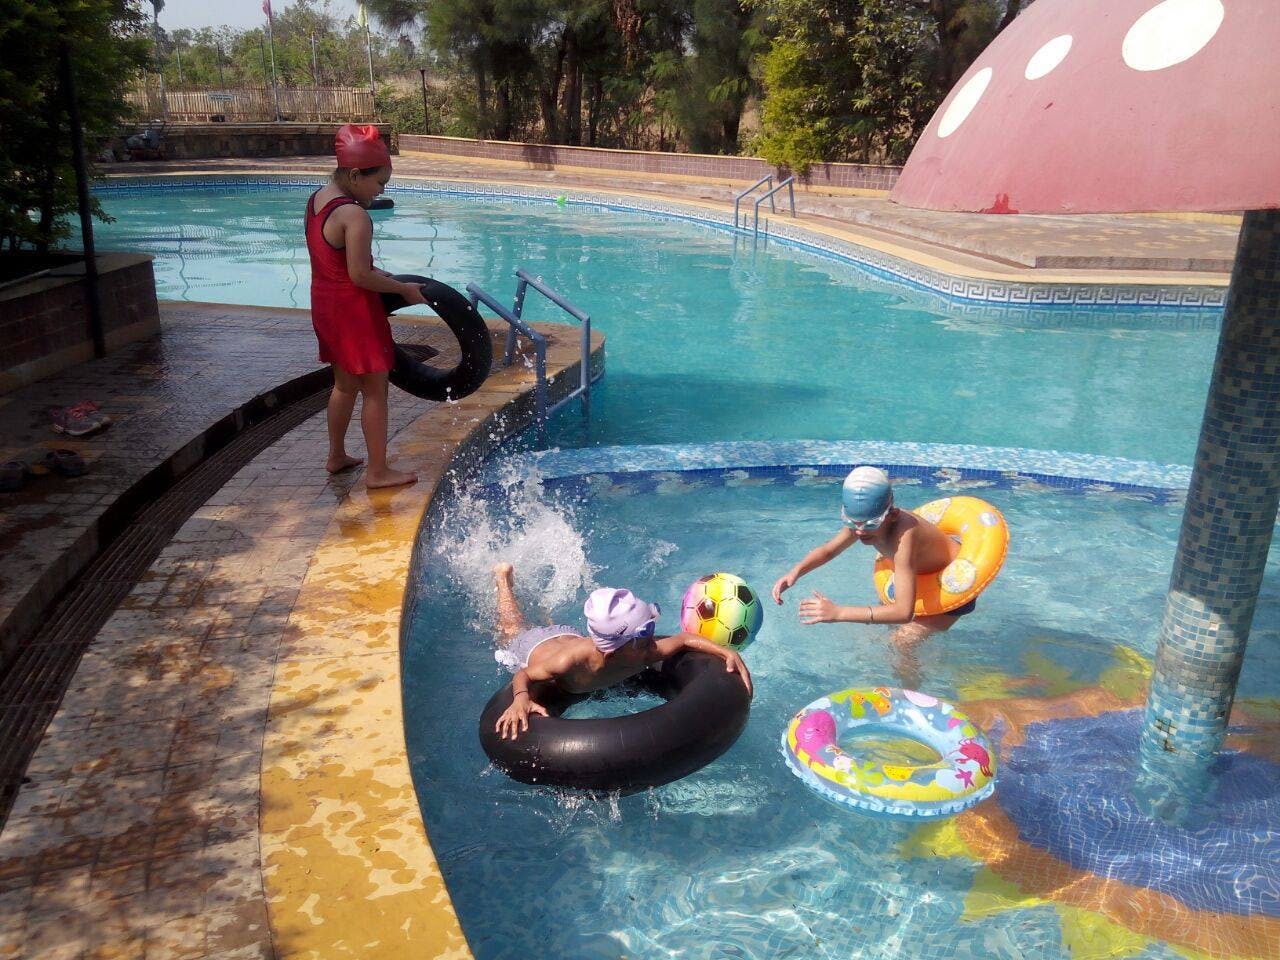 Leisure,Water,Swimming pool,Fun,Leisure centre,Recreation,Summer,Water park,Vacation,Park